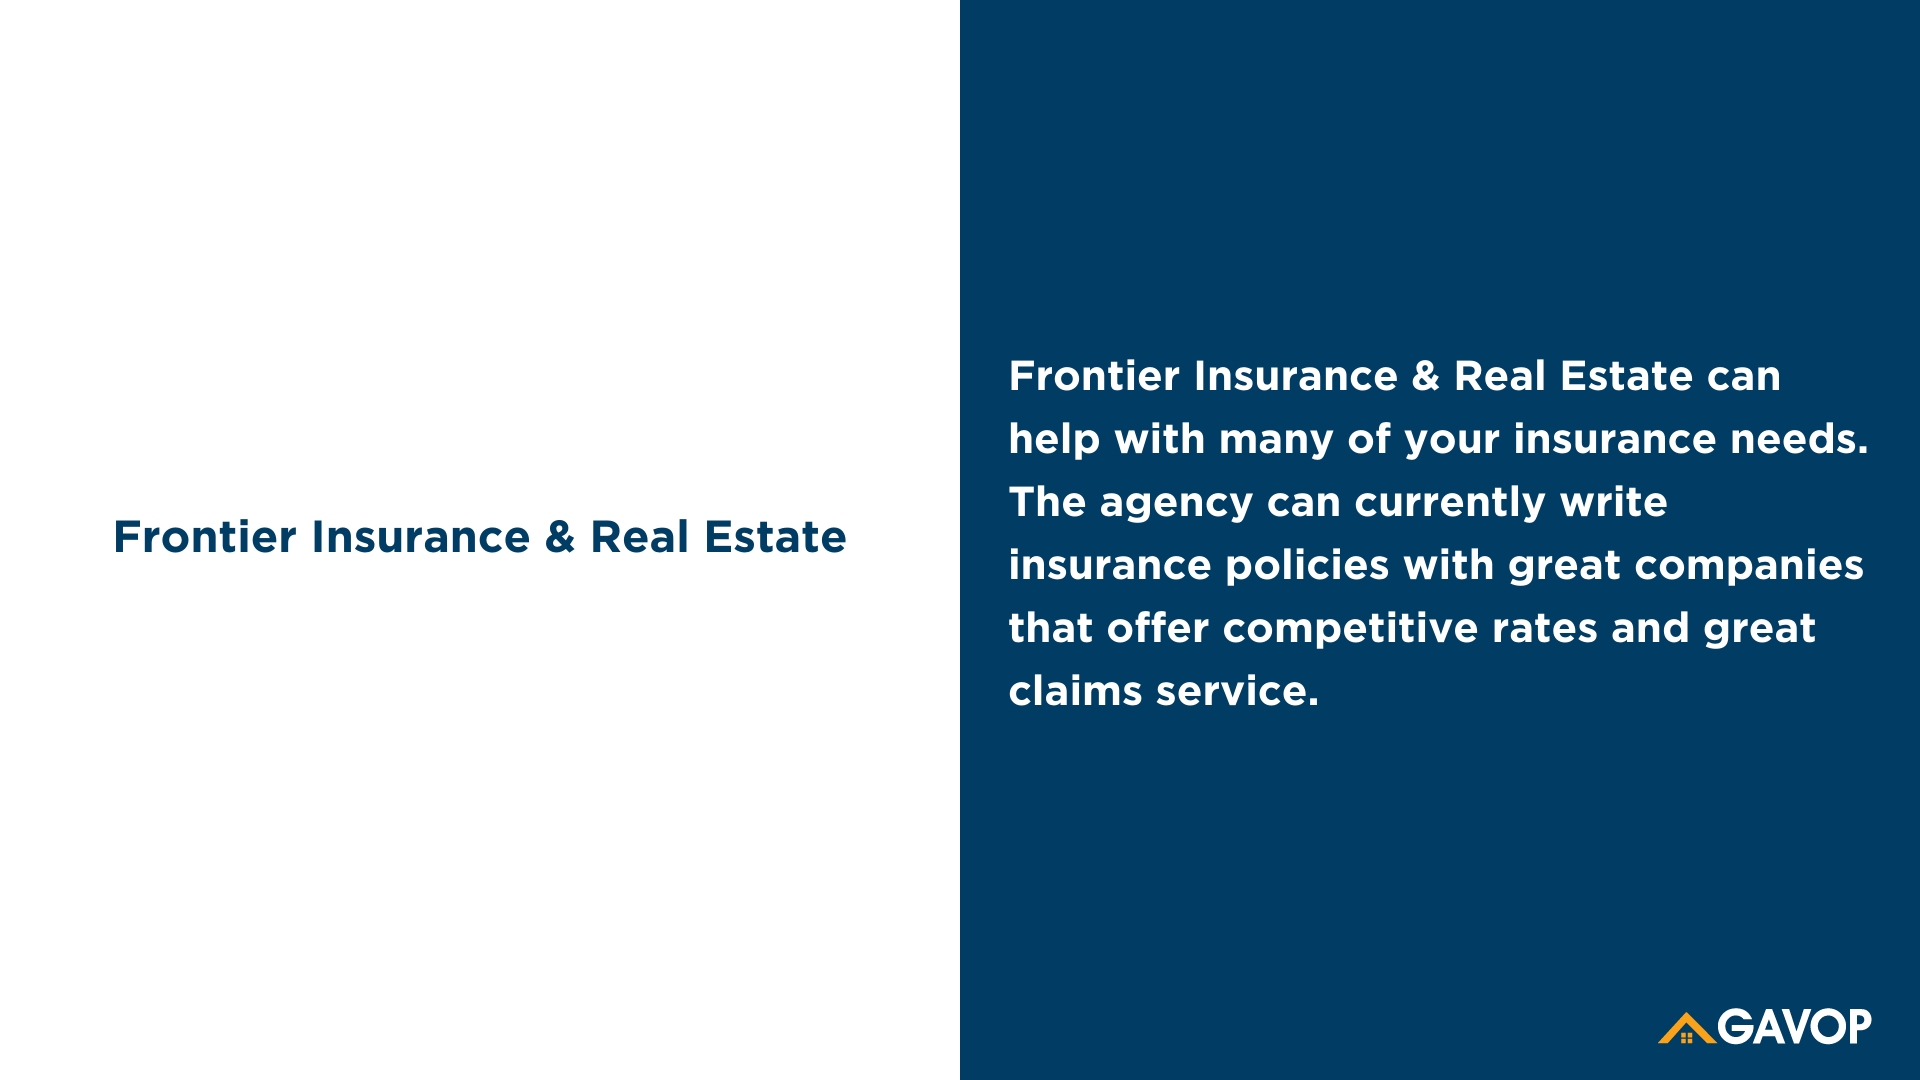 Frontier Insurance & Real Estate